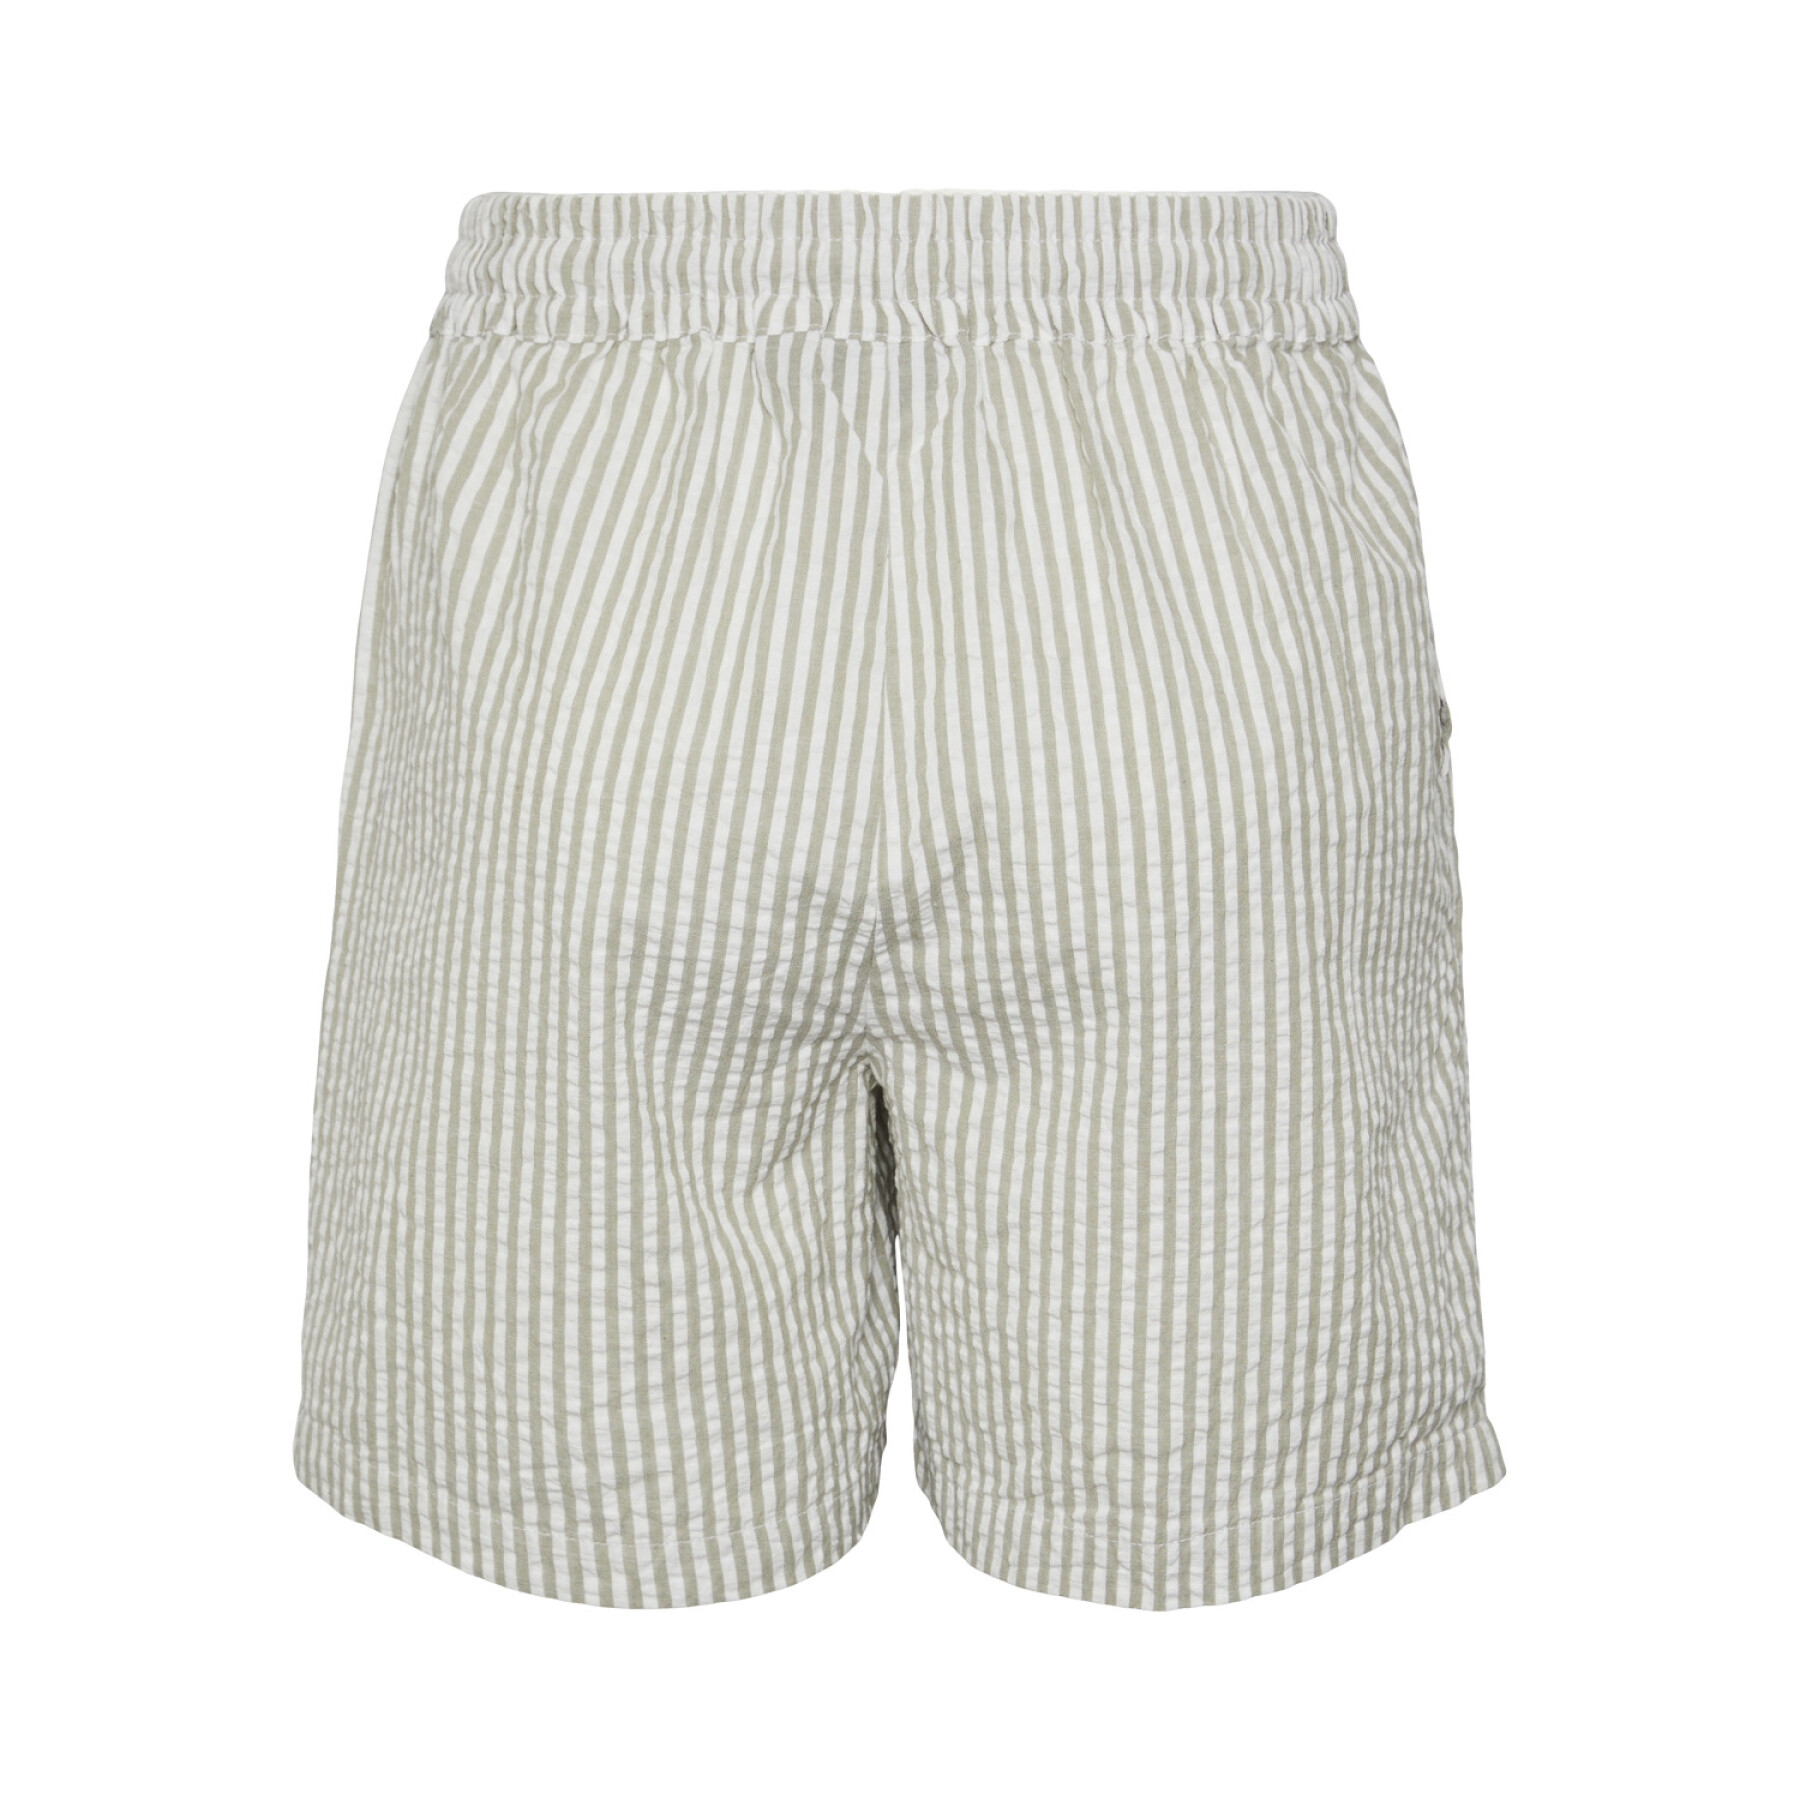 Women's loose string shorts Pieces Sally HW